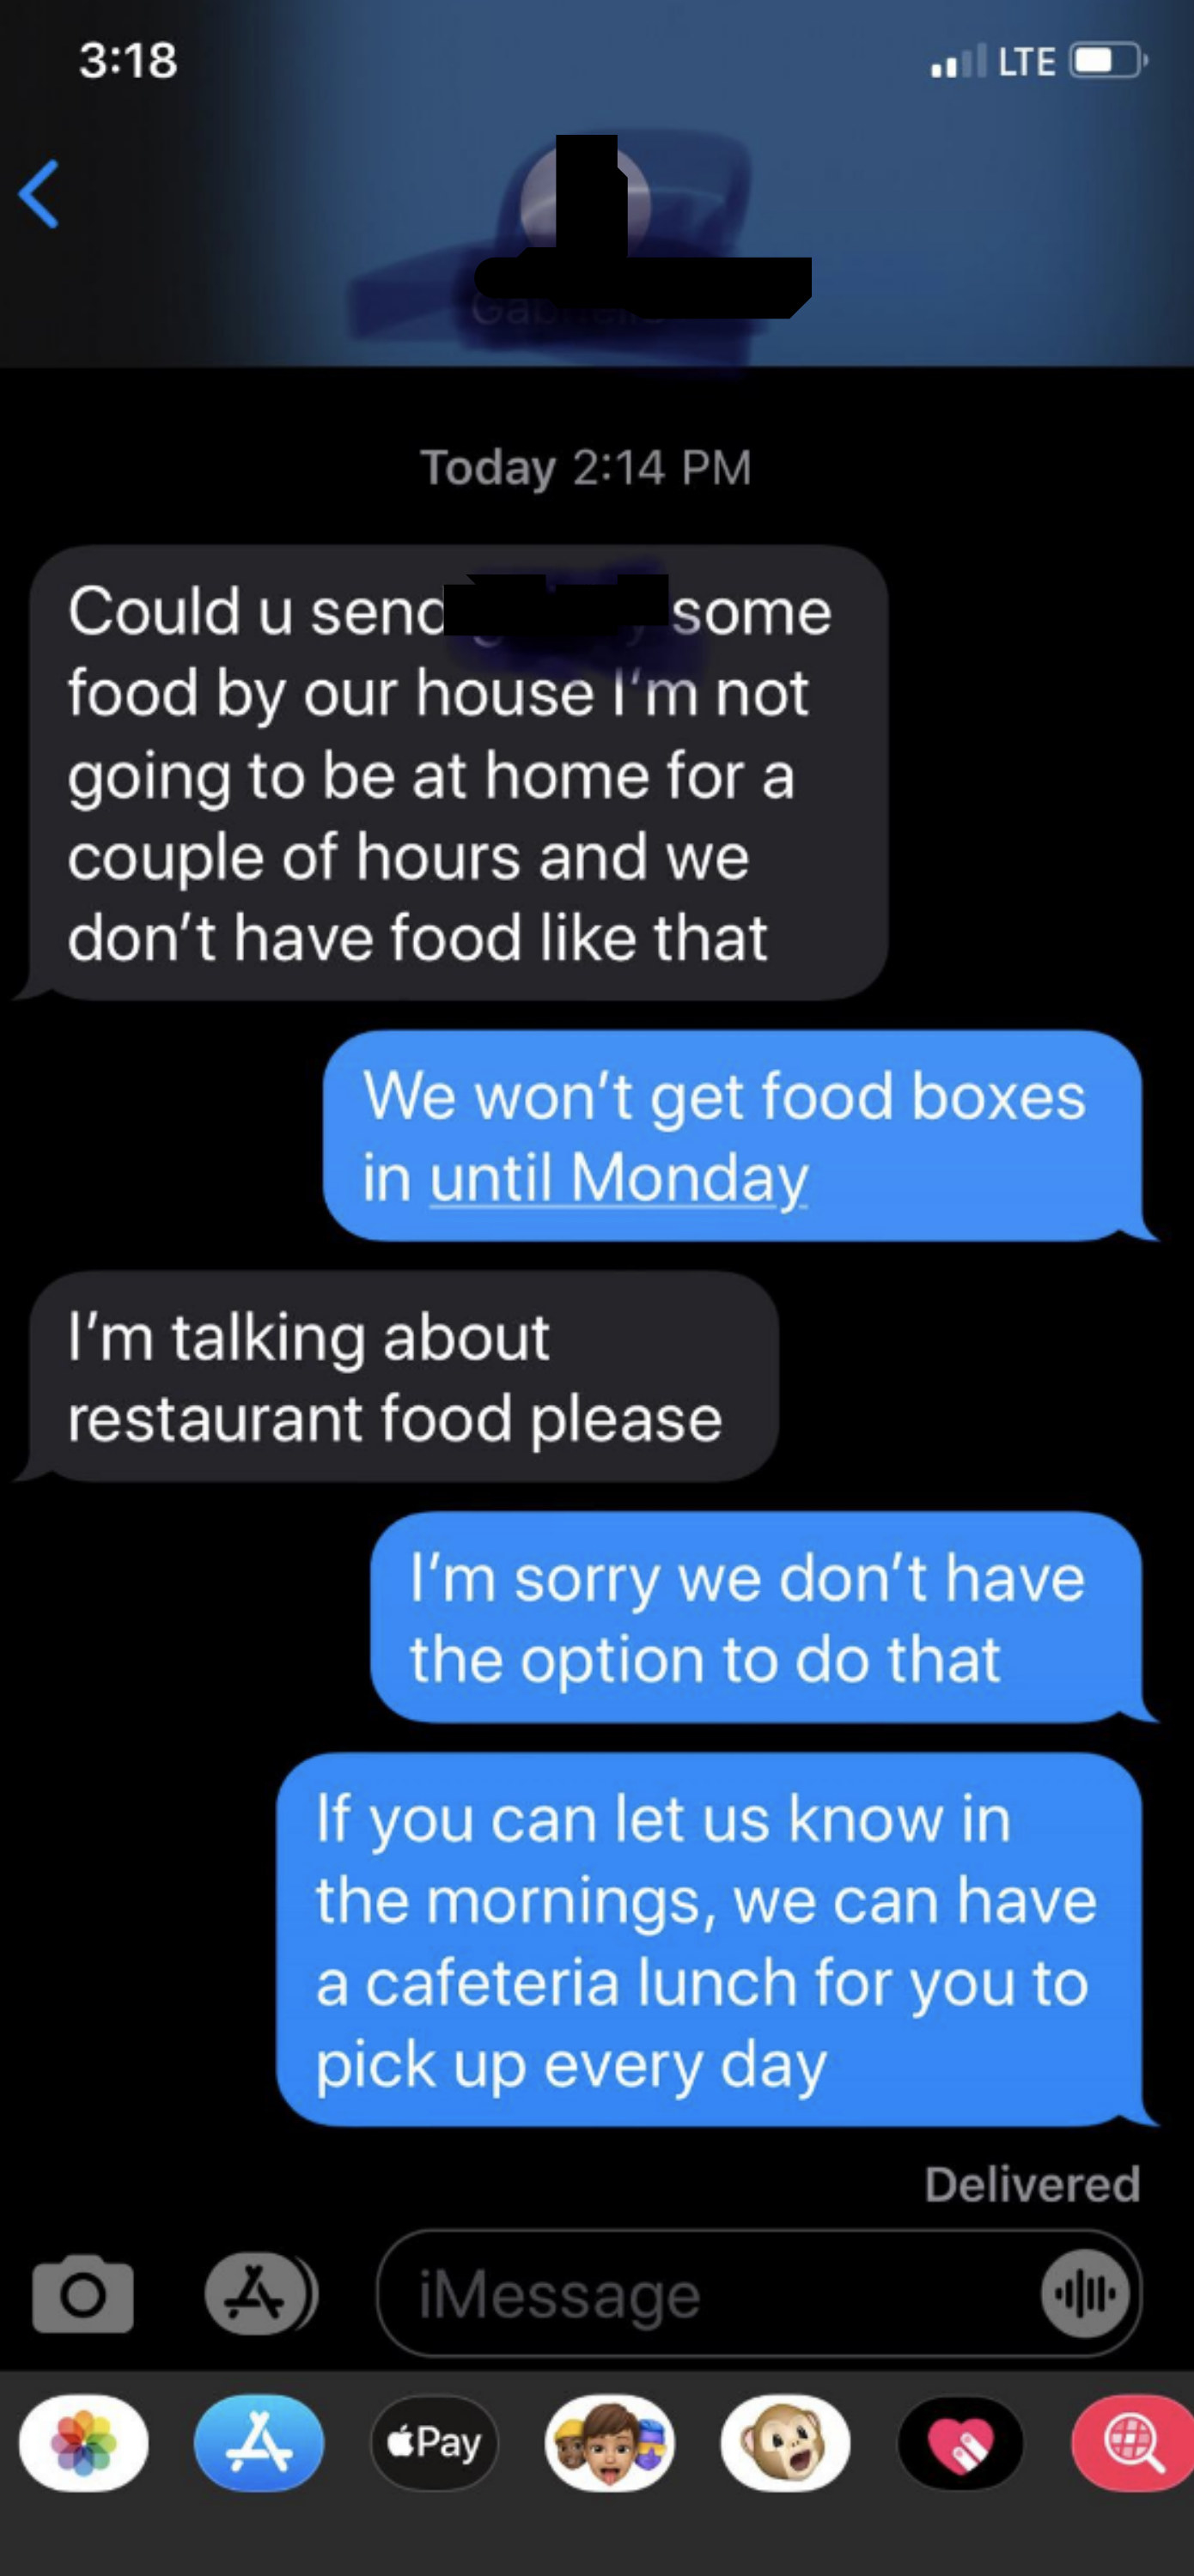 Parent asks for food to be sent to their house, and when told that food boxes aren&#x27;t in until Monday, they say they&#x27;re talking about restaurant food